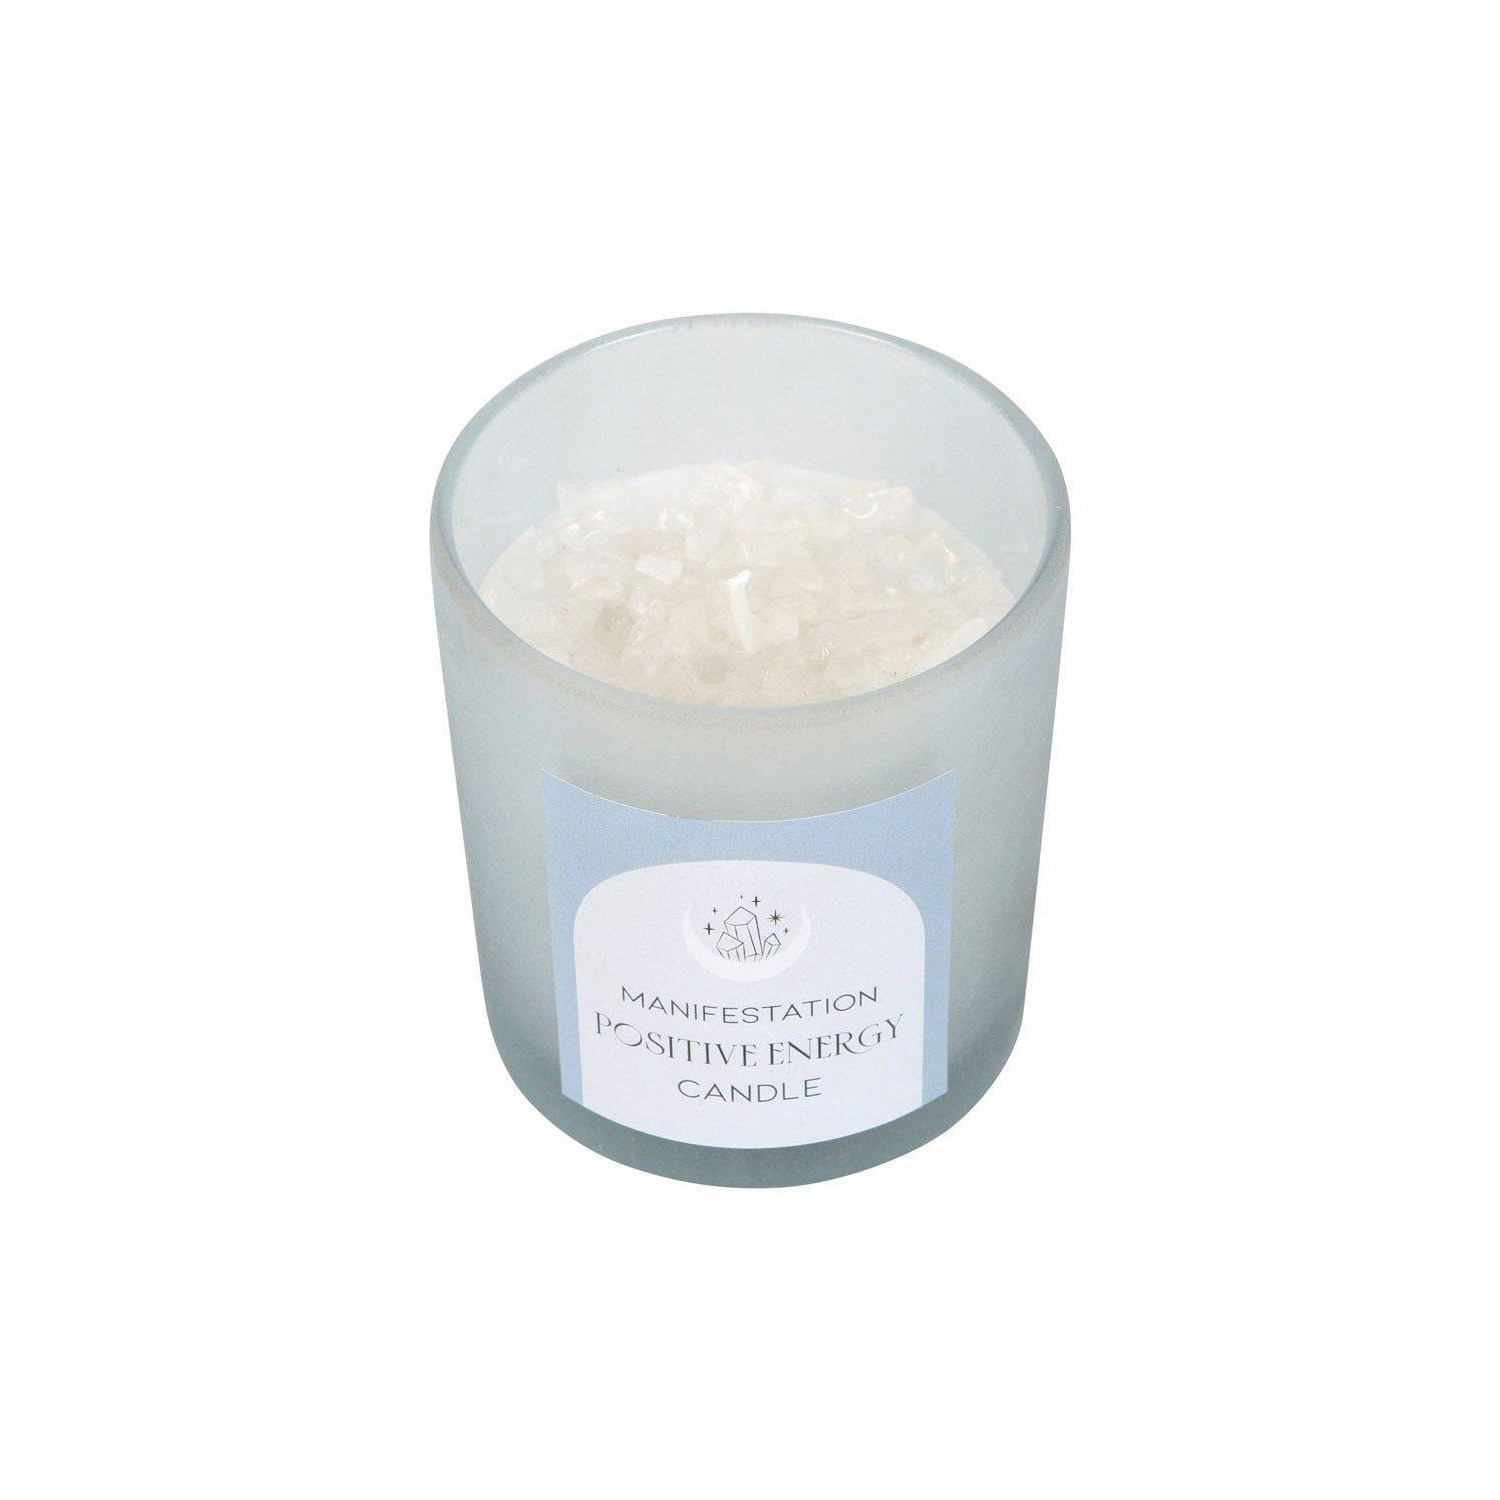 Positive Energy White Sage Crystal Chips Scented Candle - image 1